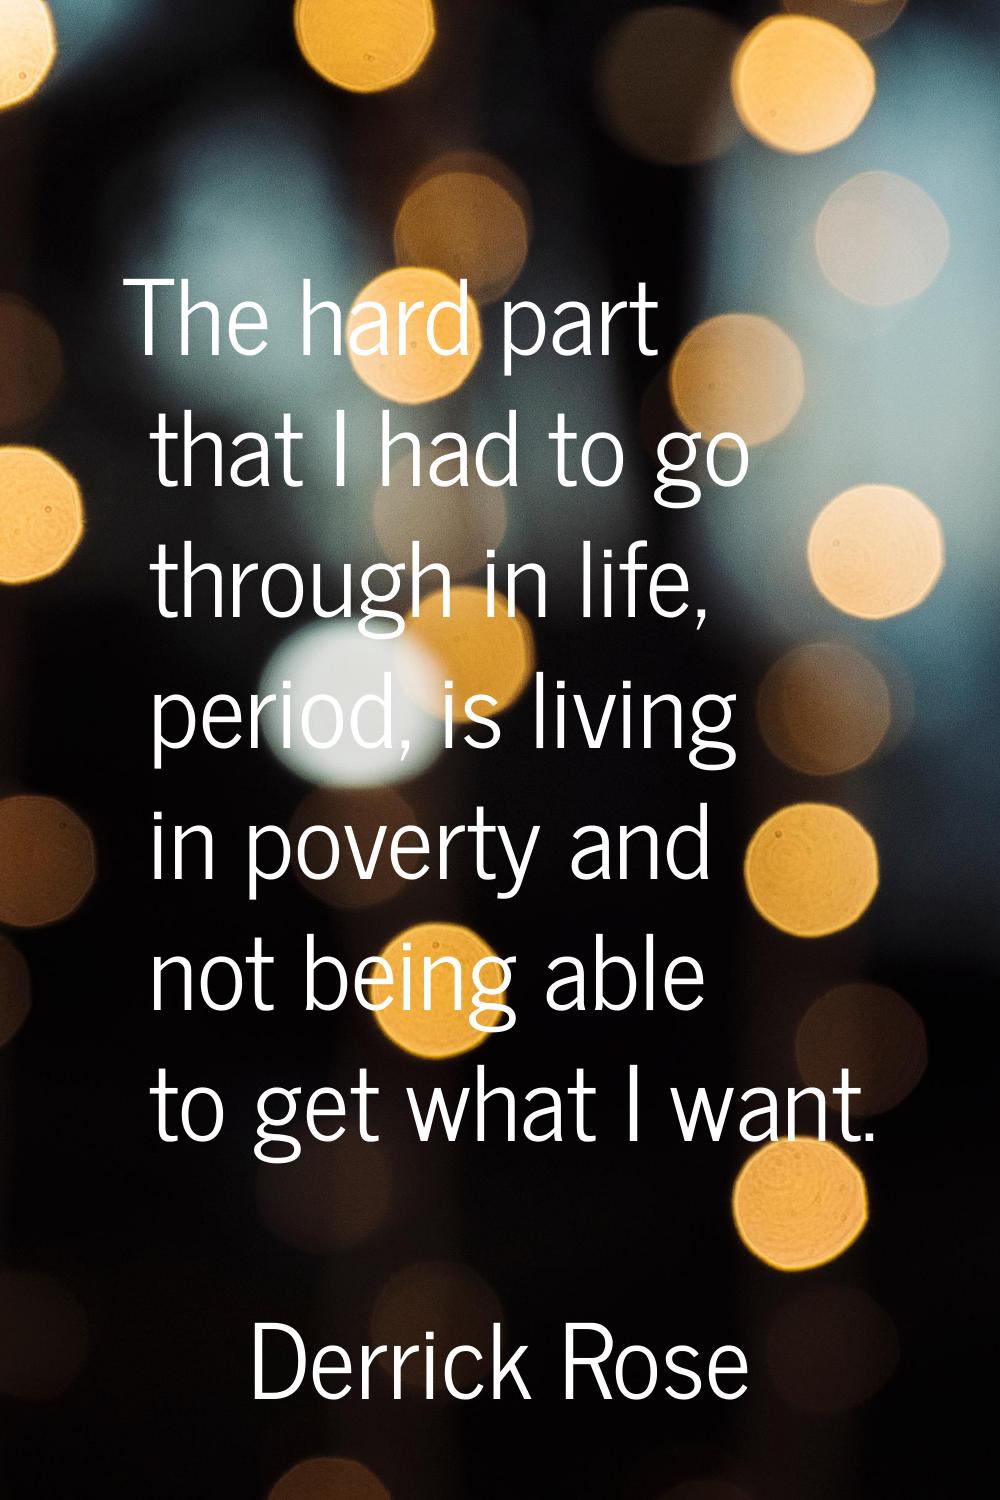 The hard part that I had to go through in life, period, is living in poverty and not being able to 